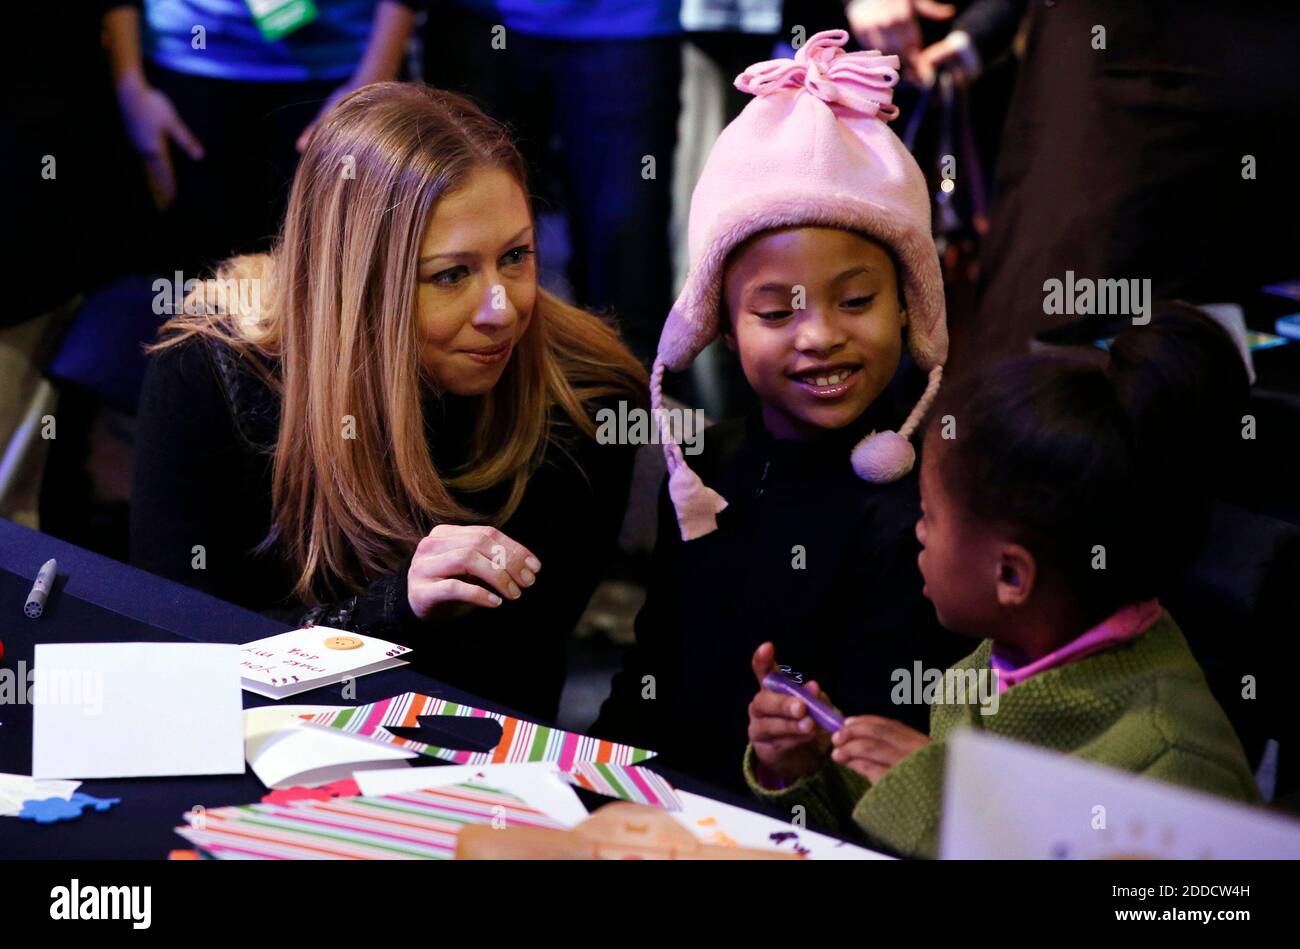 NO FILM, NO VIDEO, NO TV, NO DOCUMENTARY - Chelsea Clinton works on a crafts project with Addison Rose, 8, and Auden Easter, 4, during a National Day of Service kickoff event on the National Mall in Washington, DC, USA, Saturday, January 19, 2013. Photo by Brian Cassella/Chicago Tribune/MCT/ABACAPRESS.COM Stock Photo